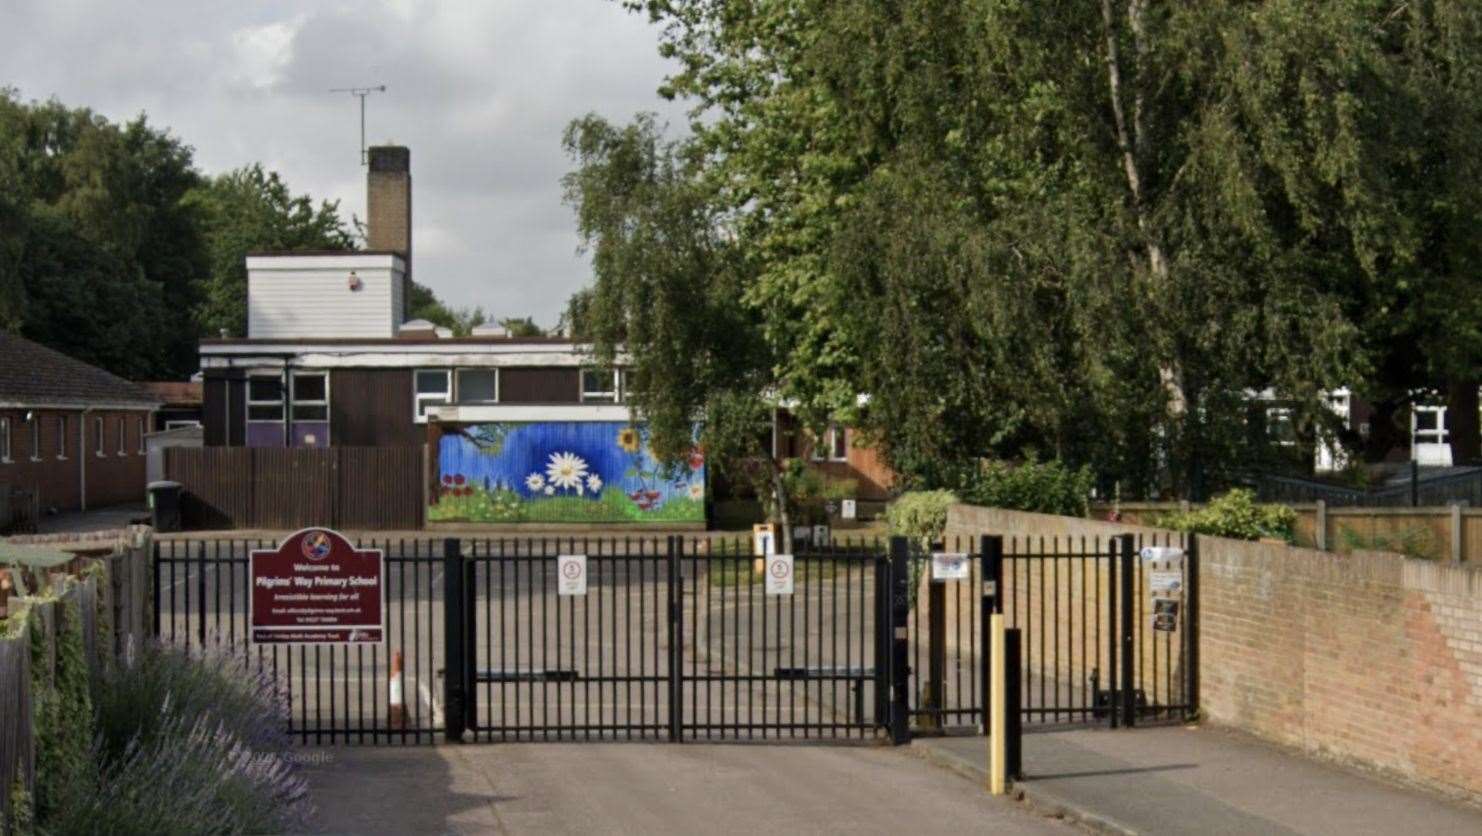 Pilgrims' Way Primary as it currently looks. Picture: Google